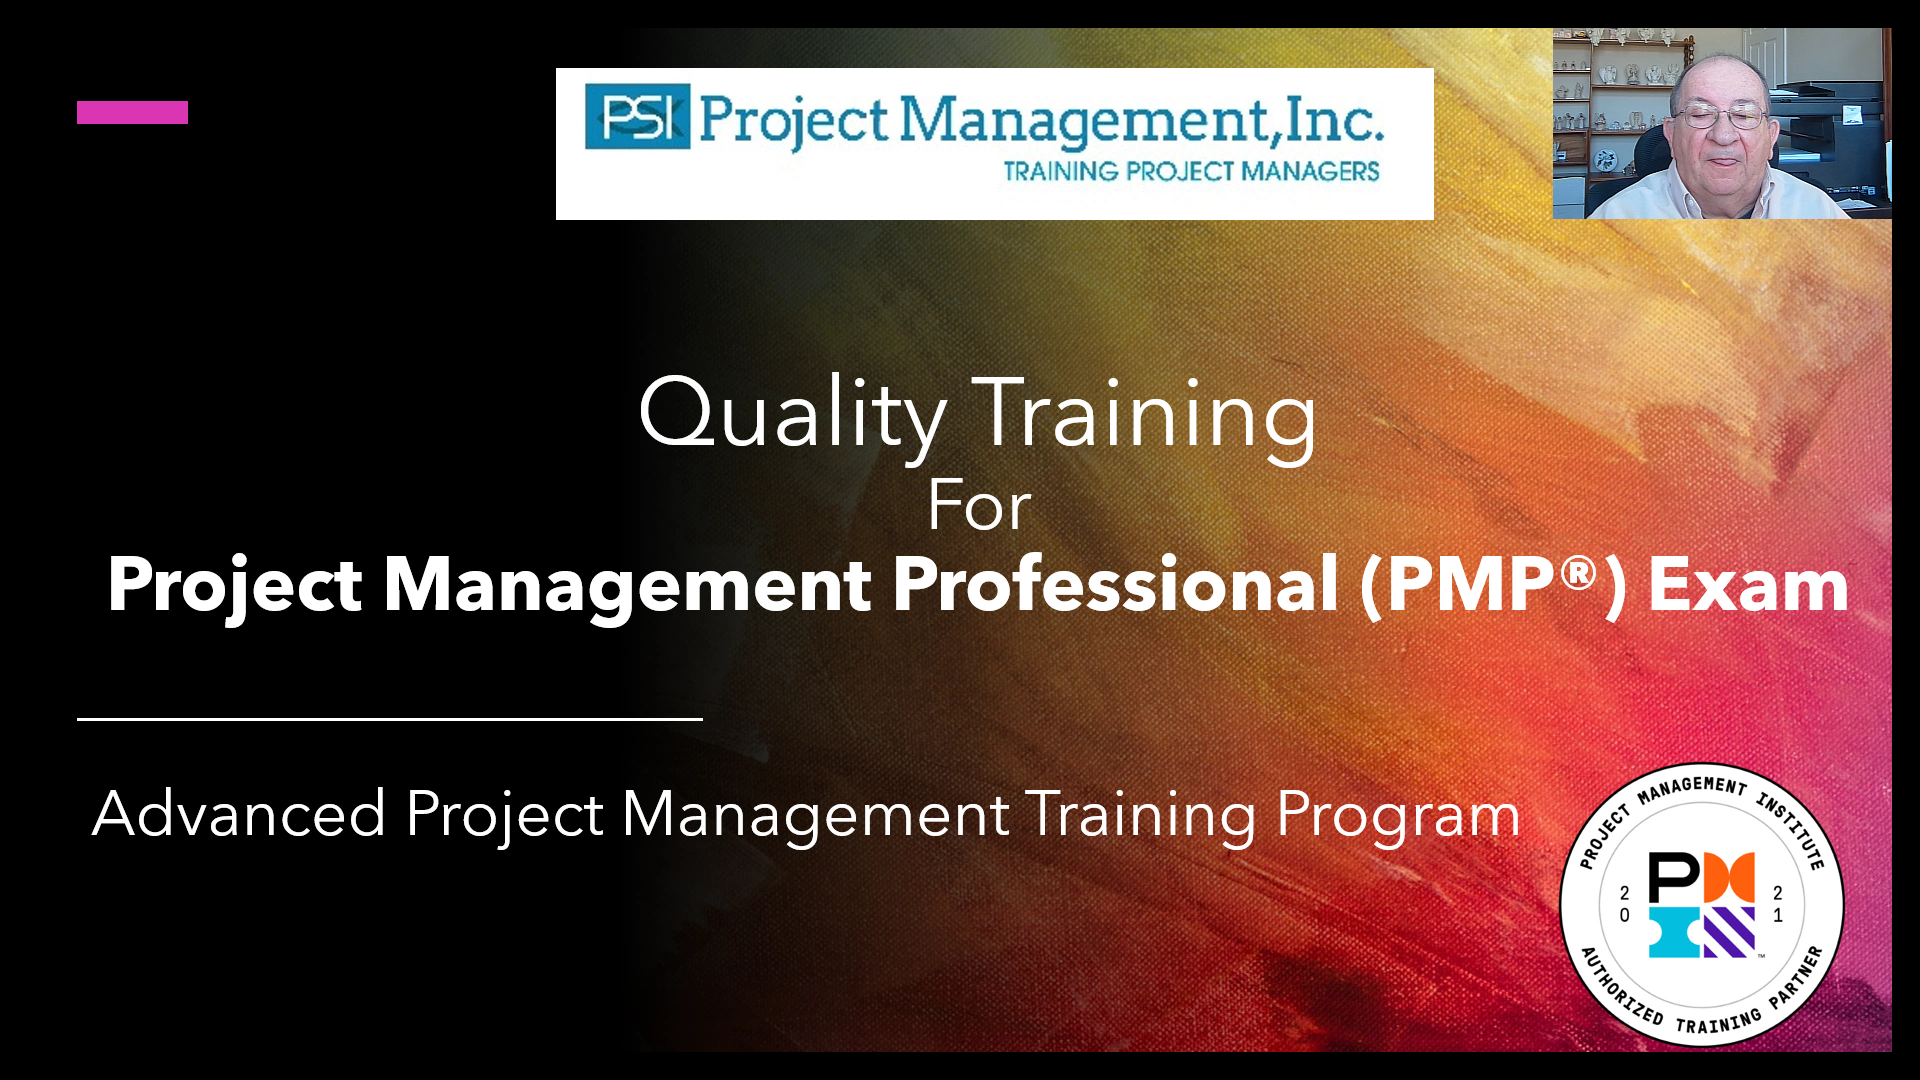 A project management training program for professionals